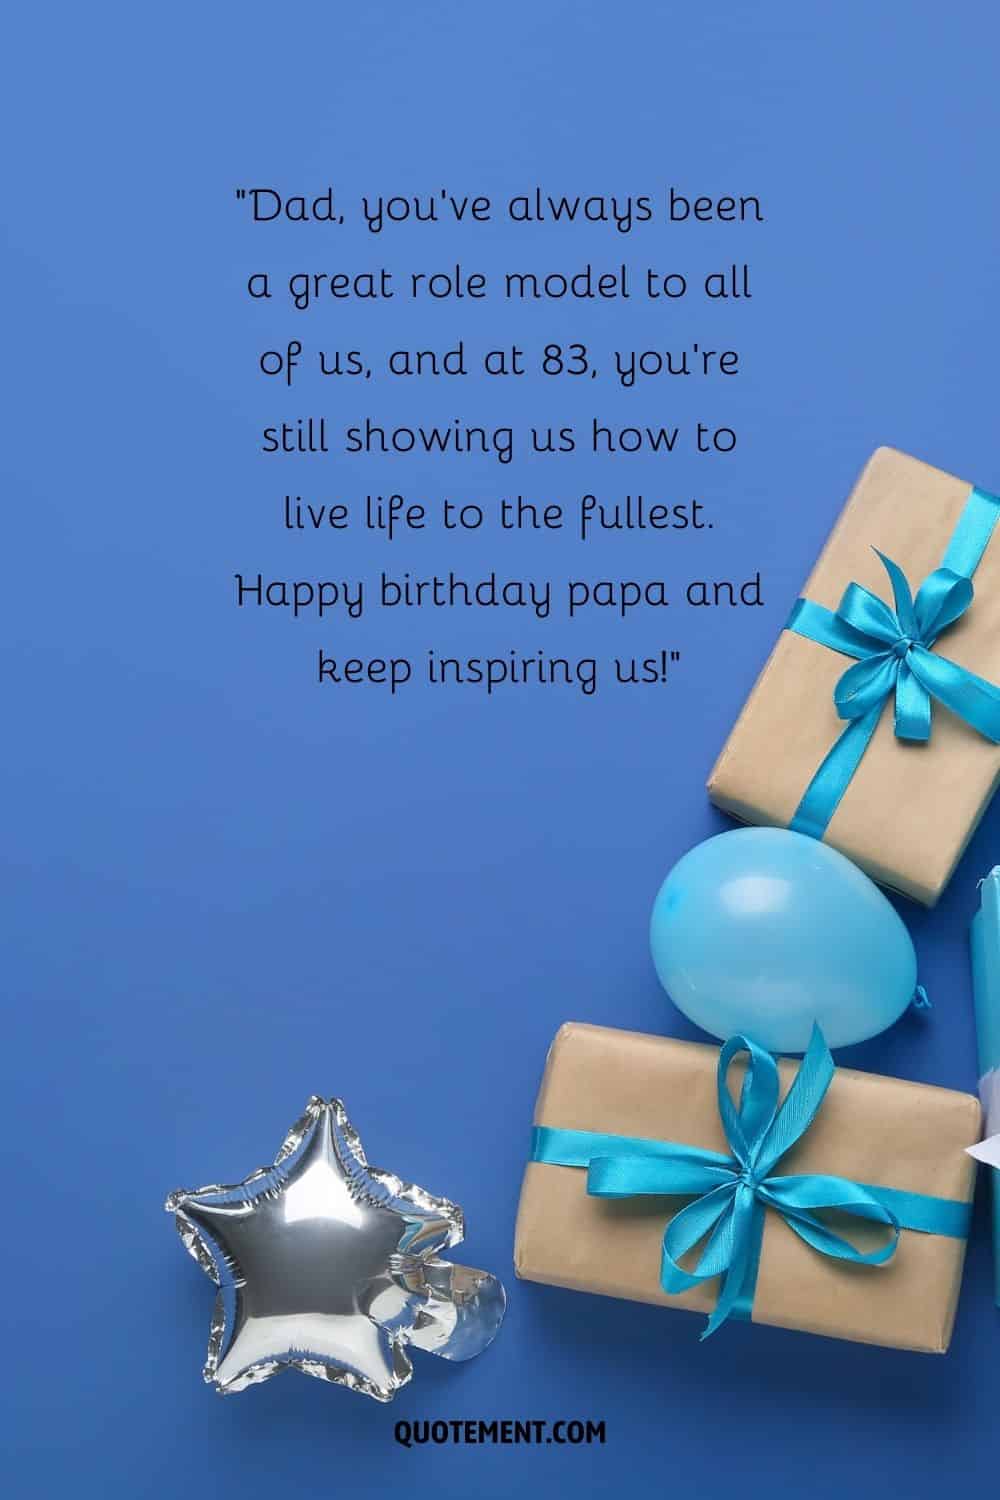 birthday gifts and balloons on a blue background
